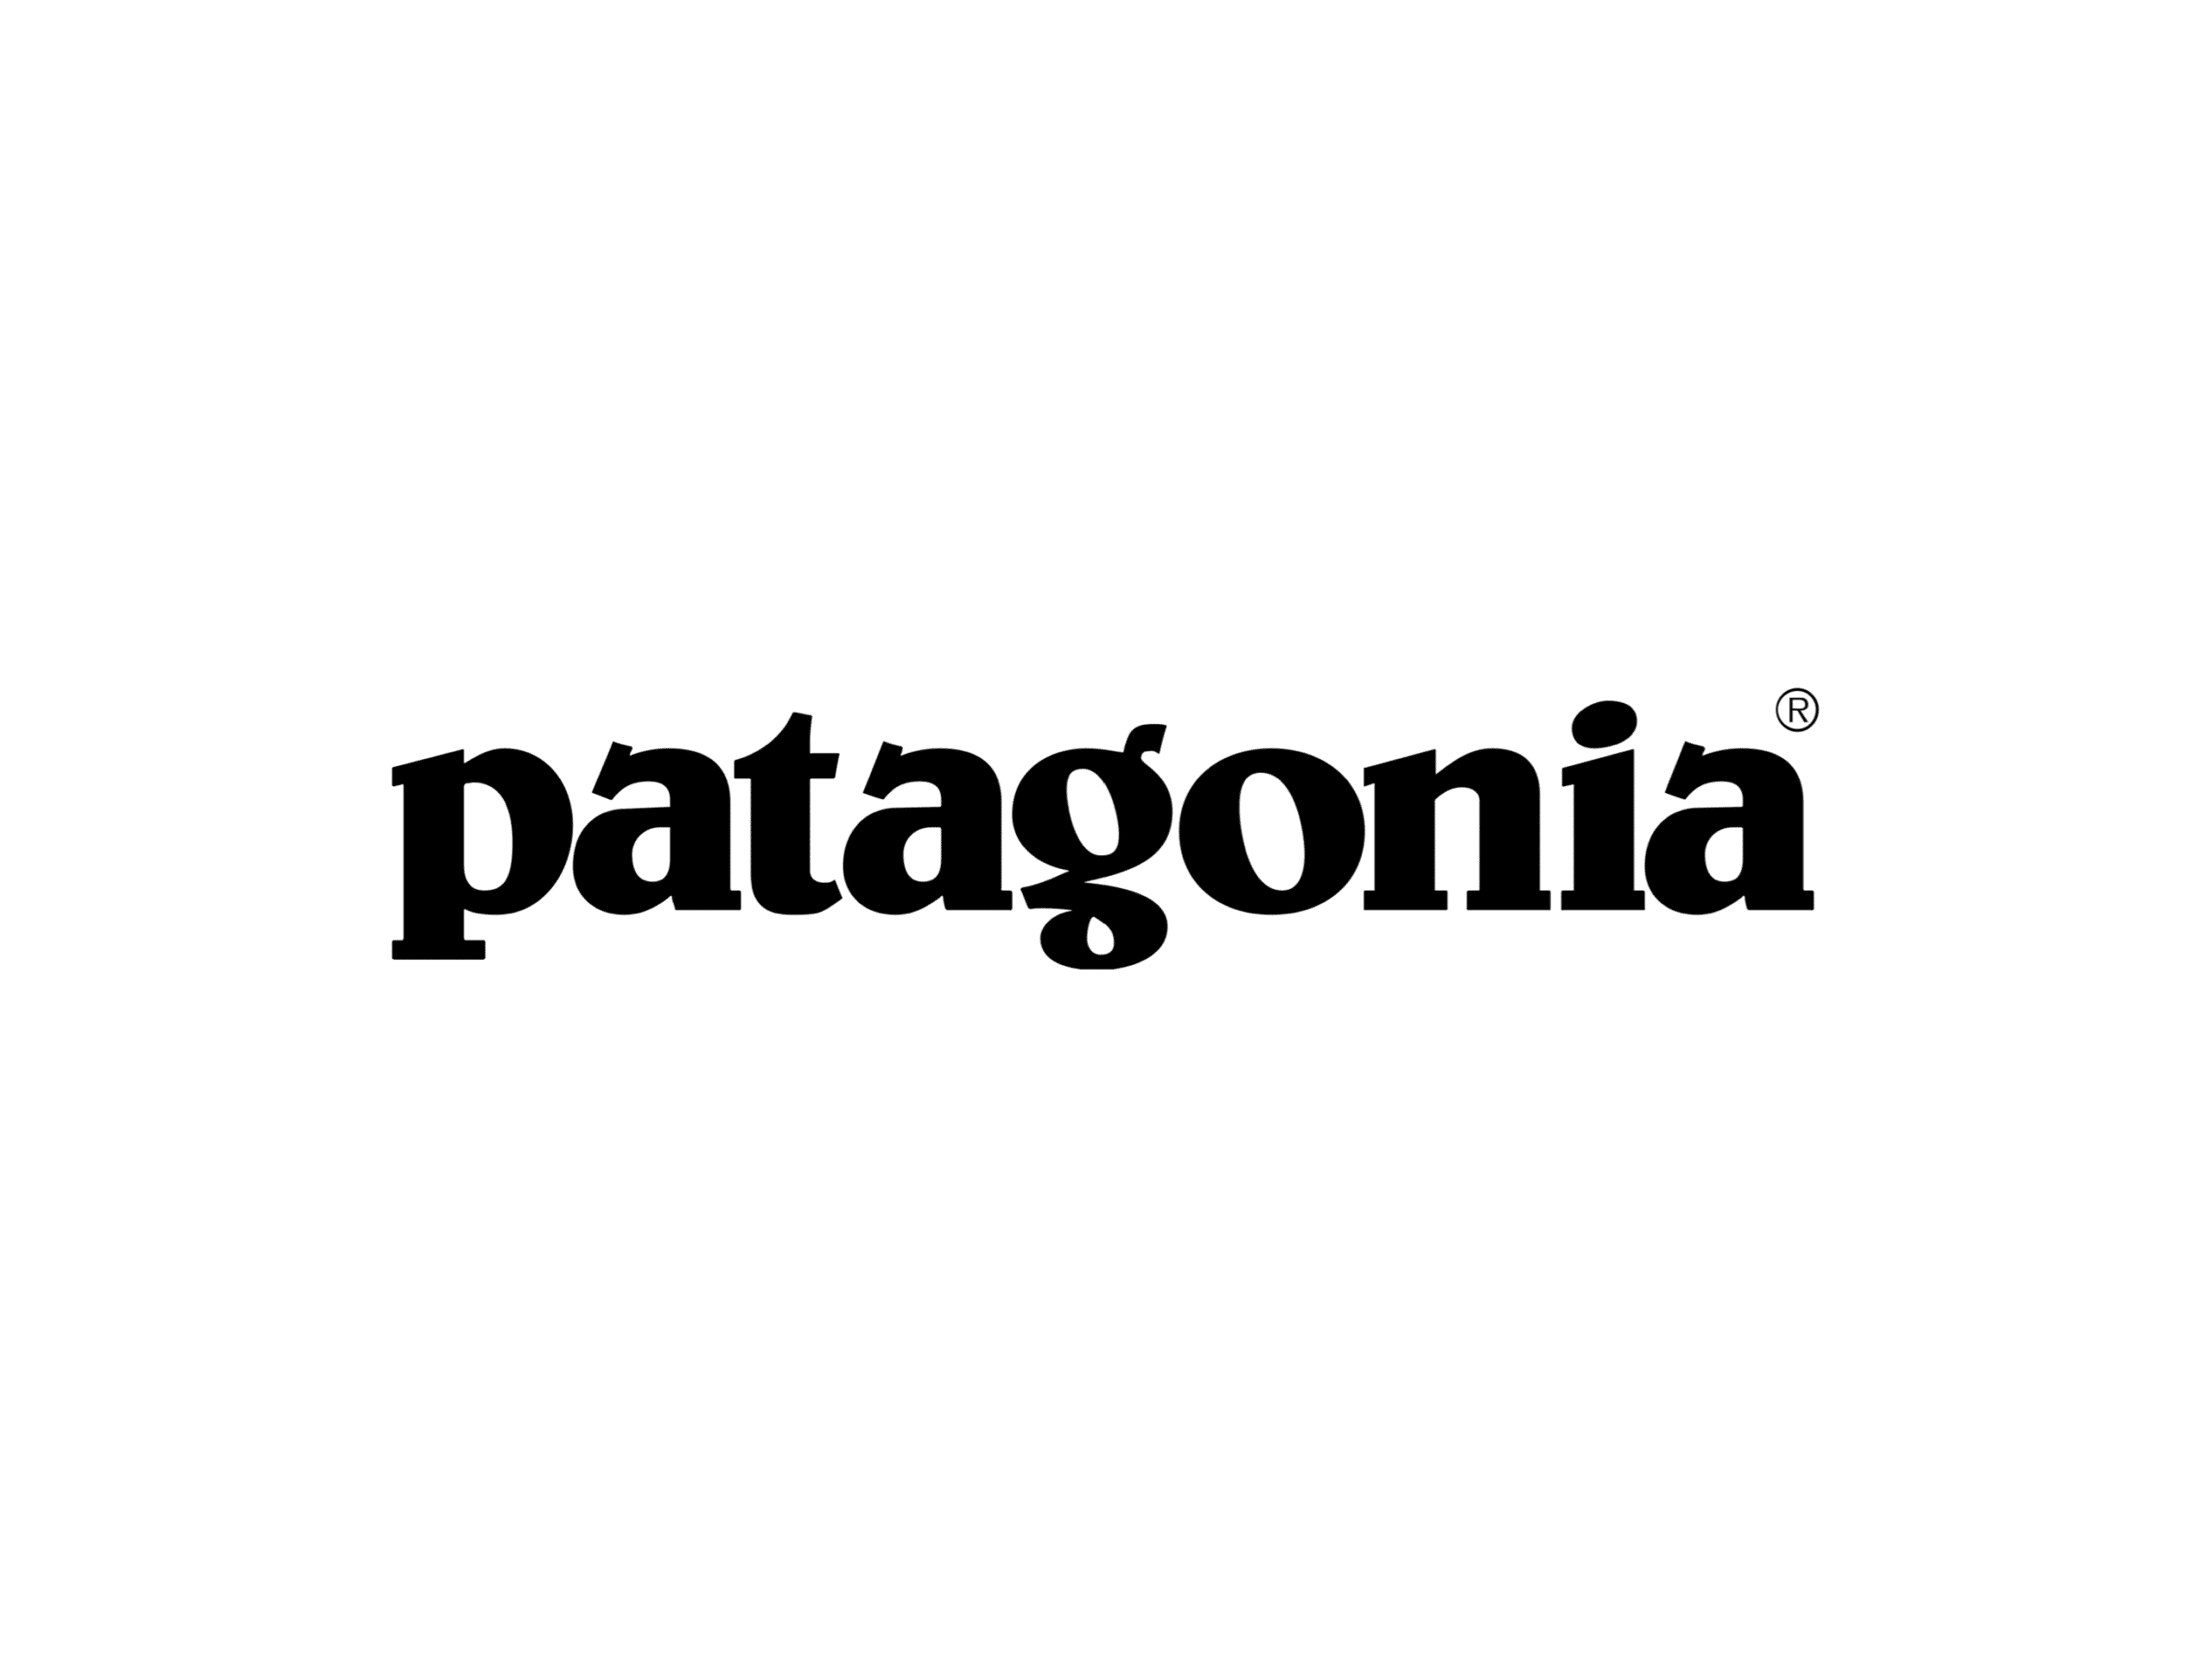 About Patagonia